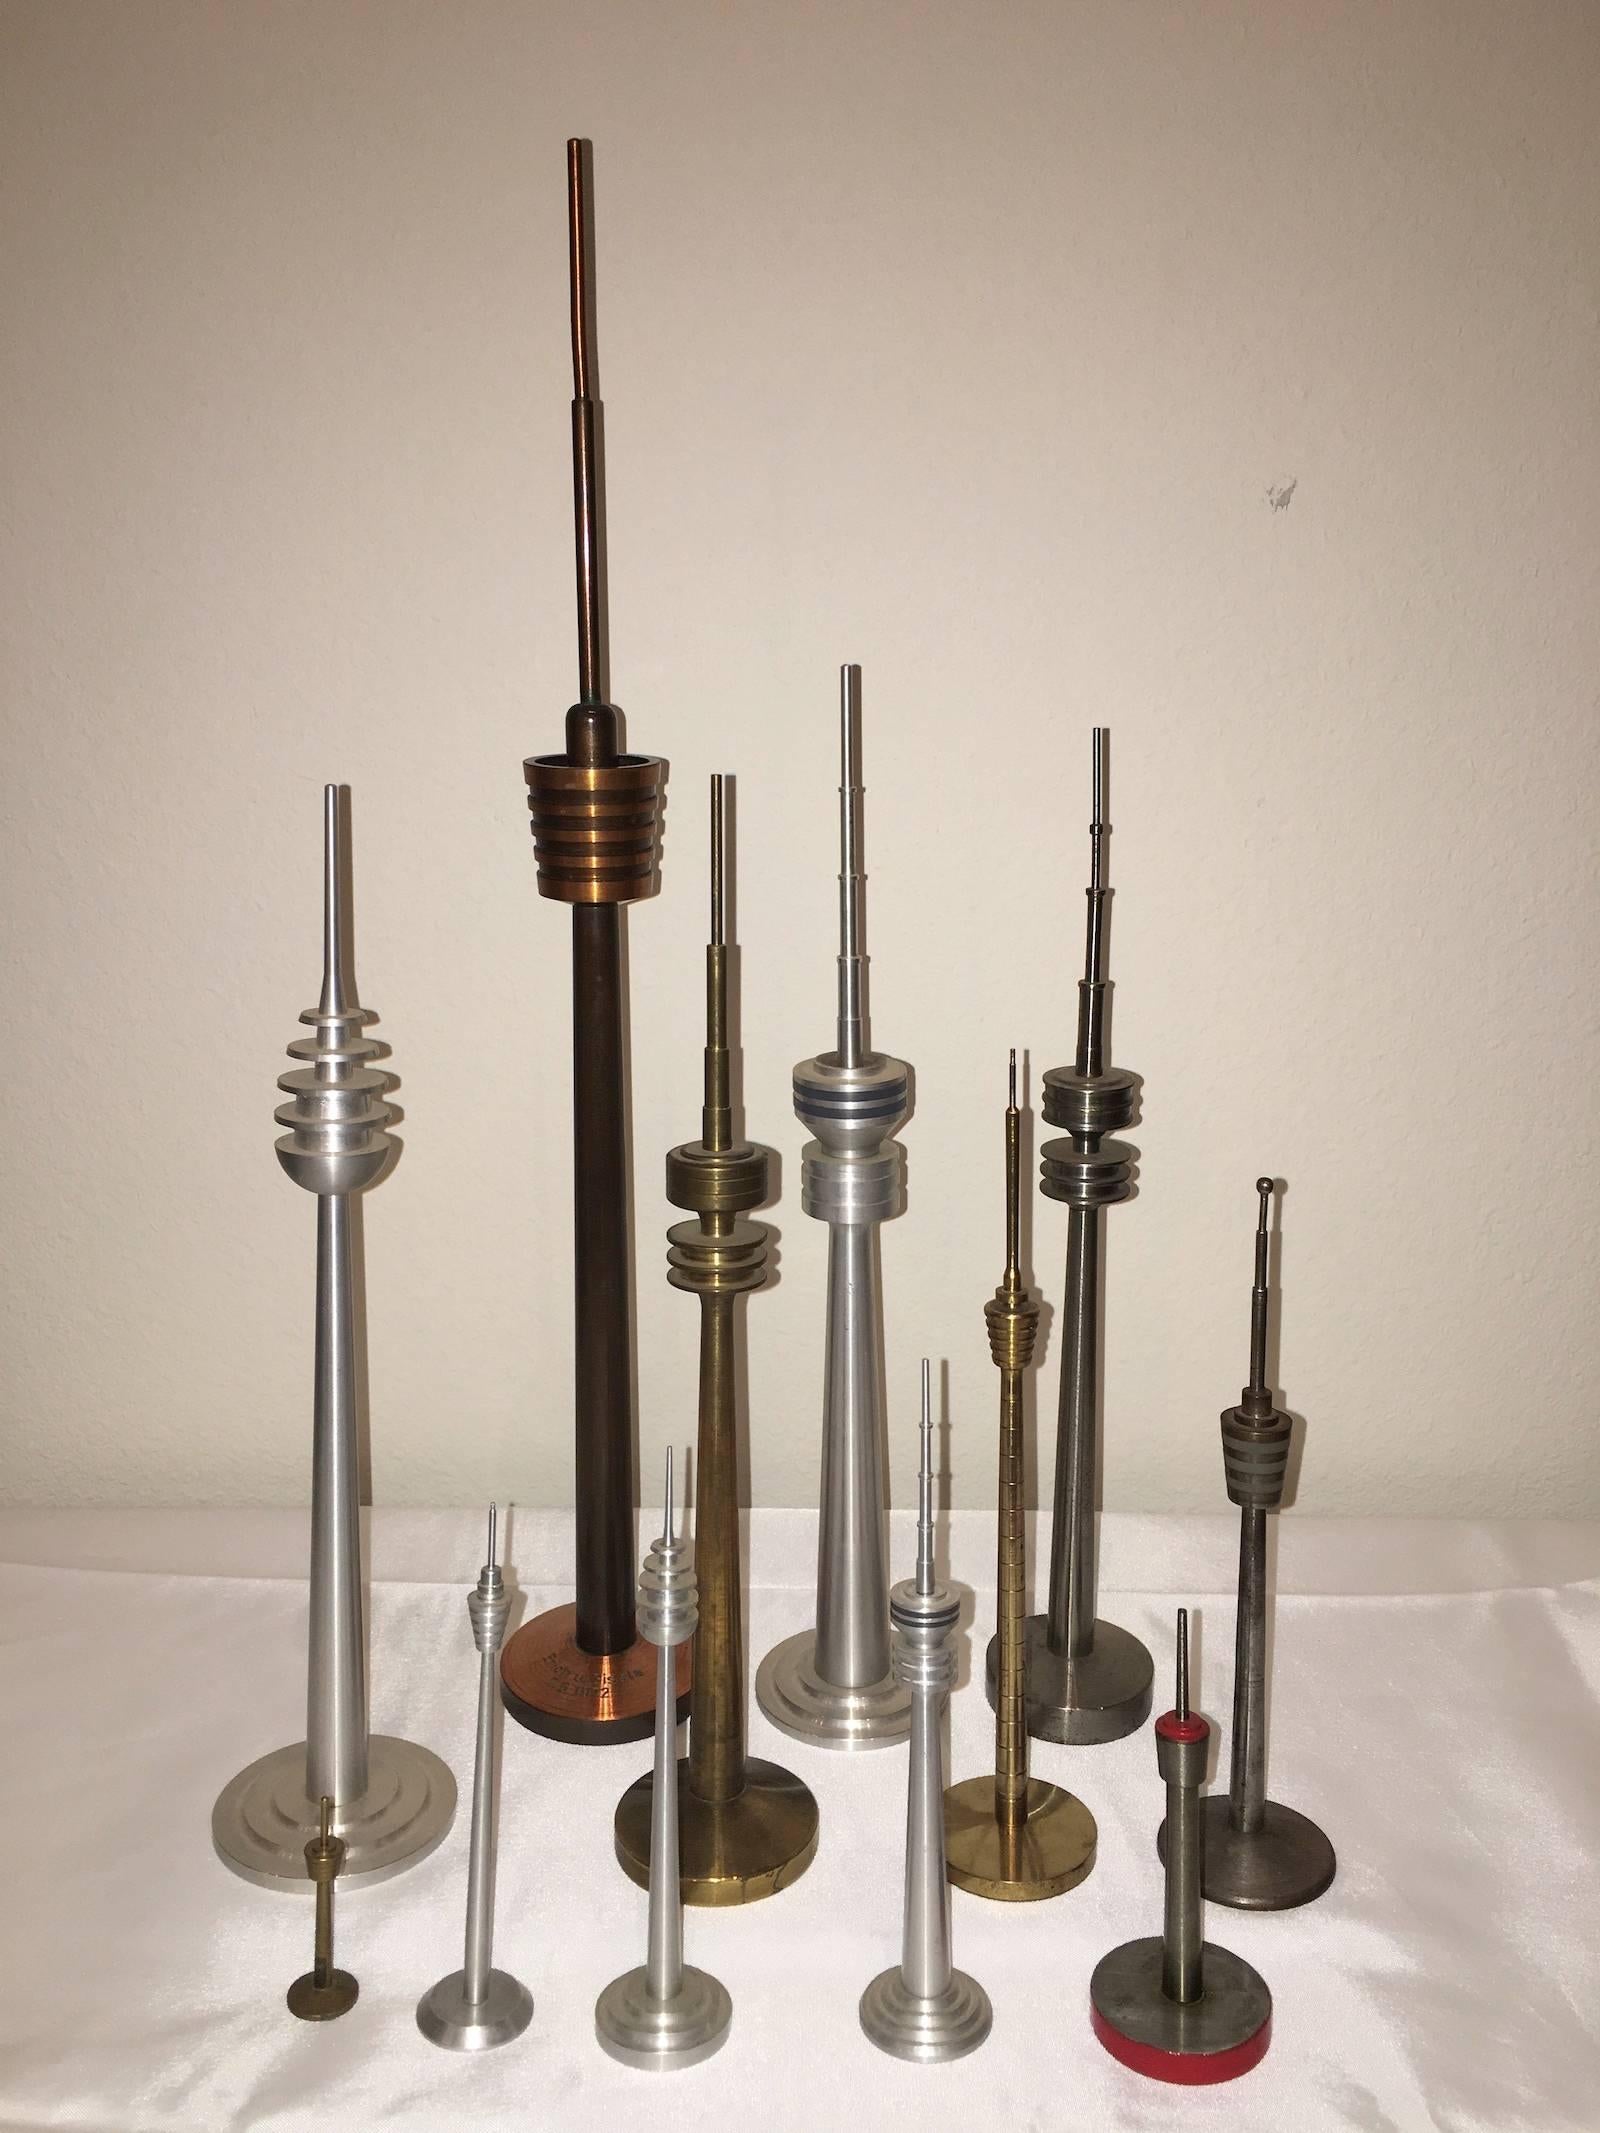 Scaled models of television tower models hand-spun in aluminum, brass, copper and other metals.
Tallest is approximate 18 1/2 inches high, smallest approximate 2 1/4 inches